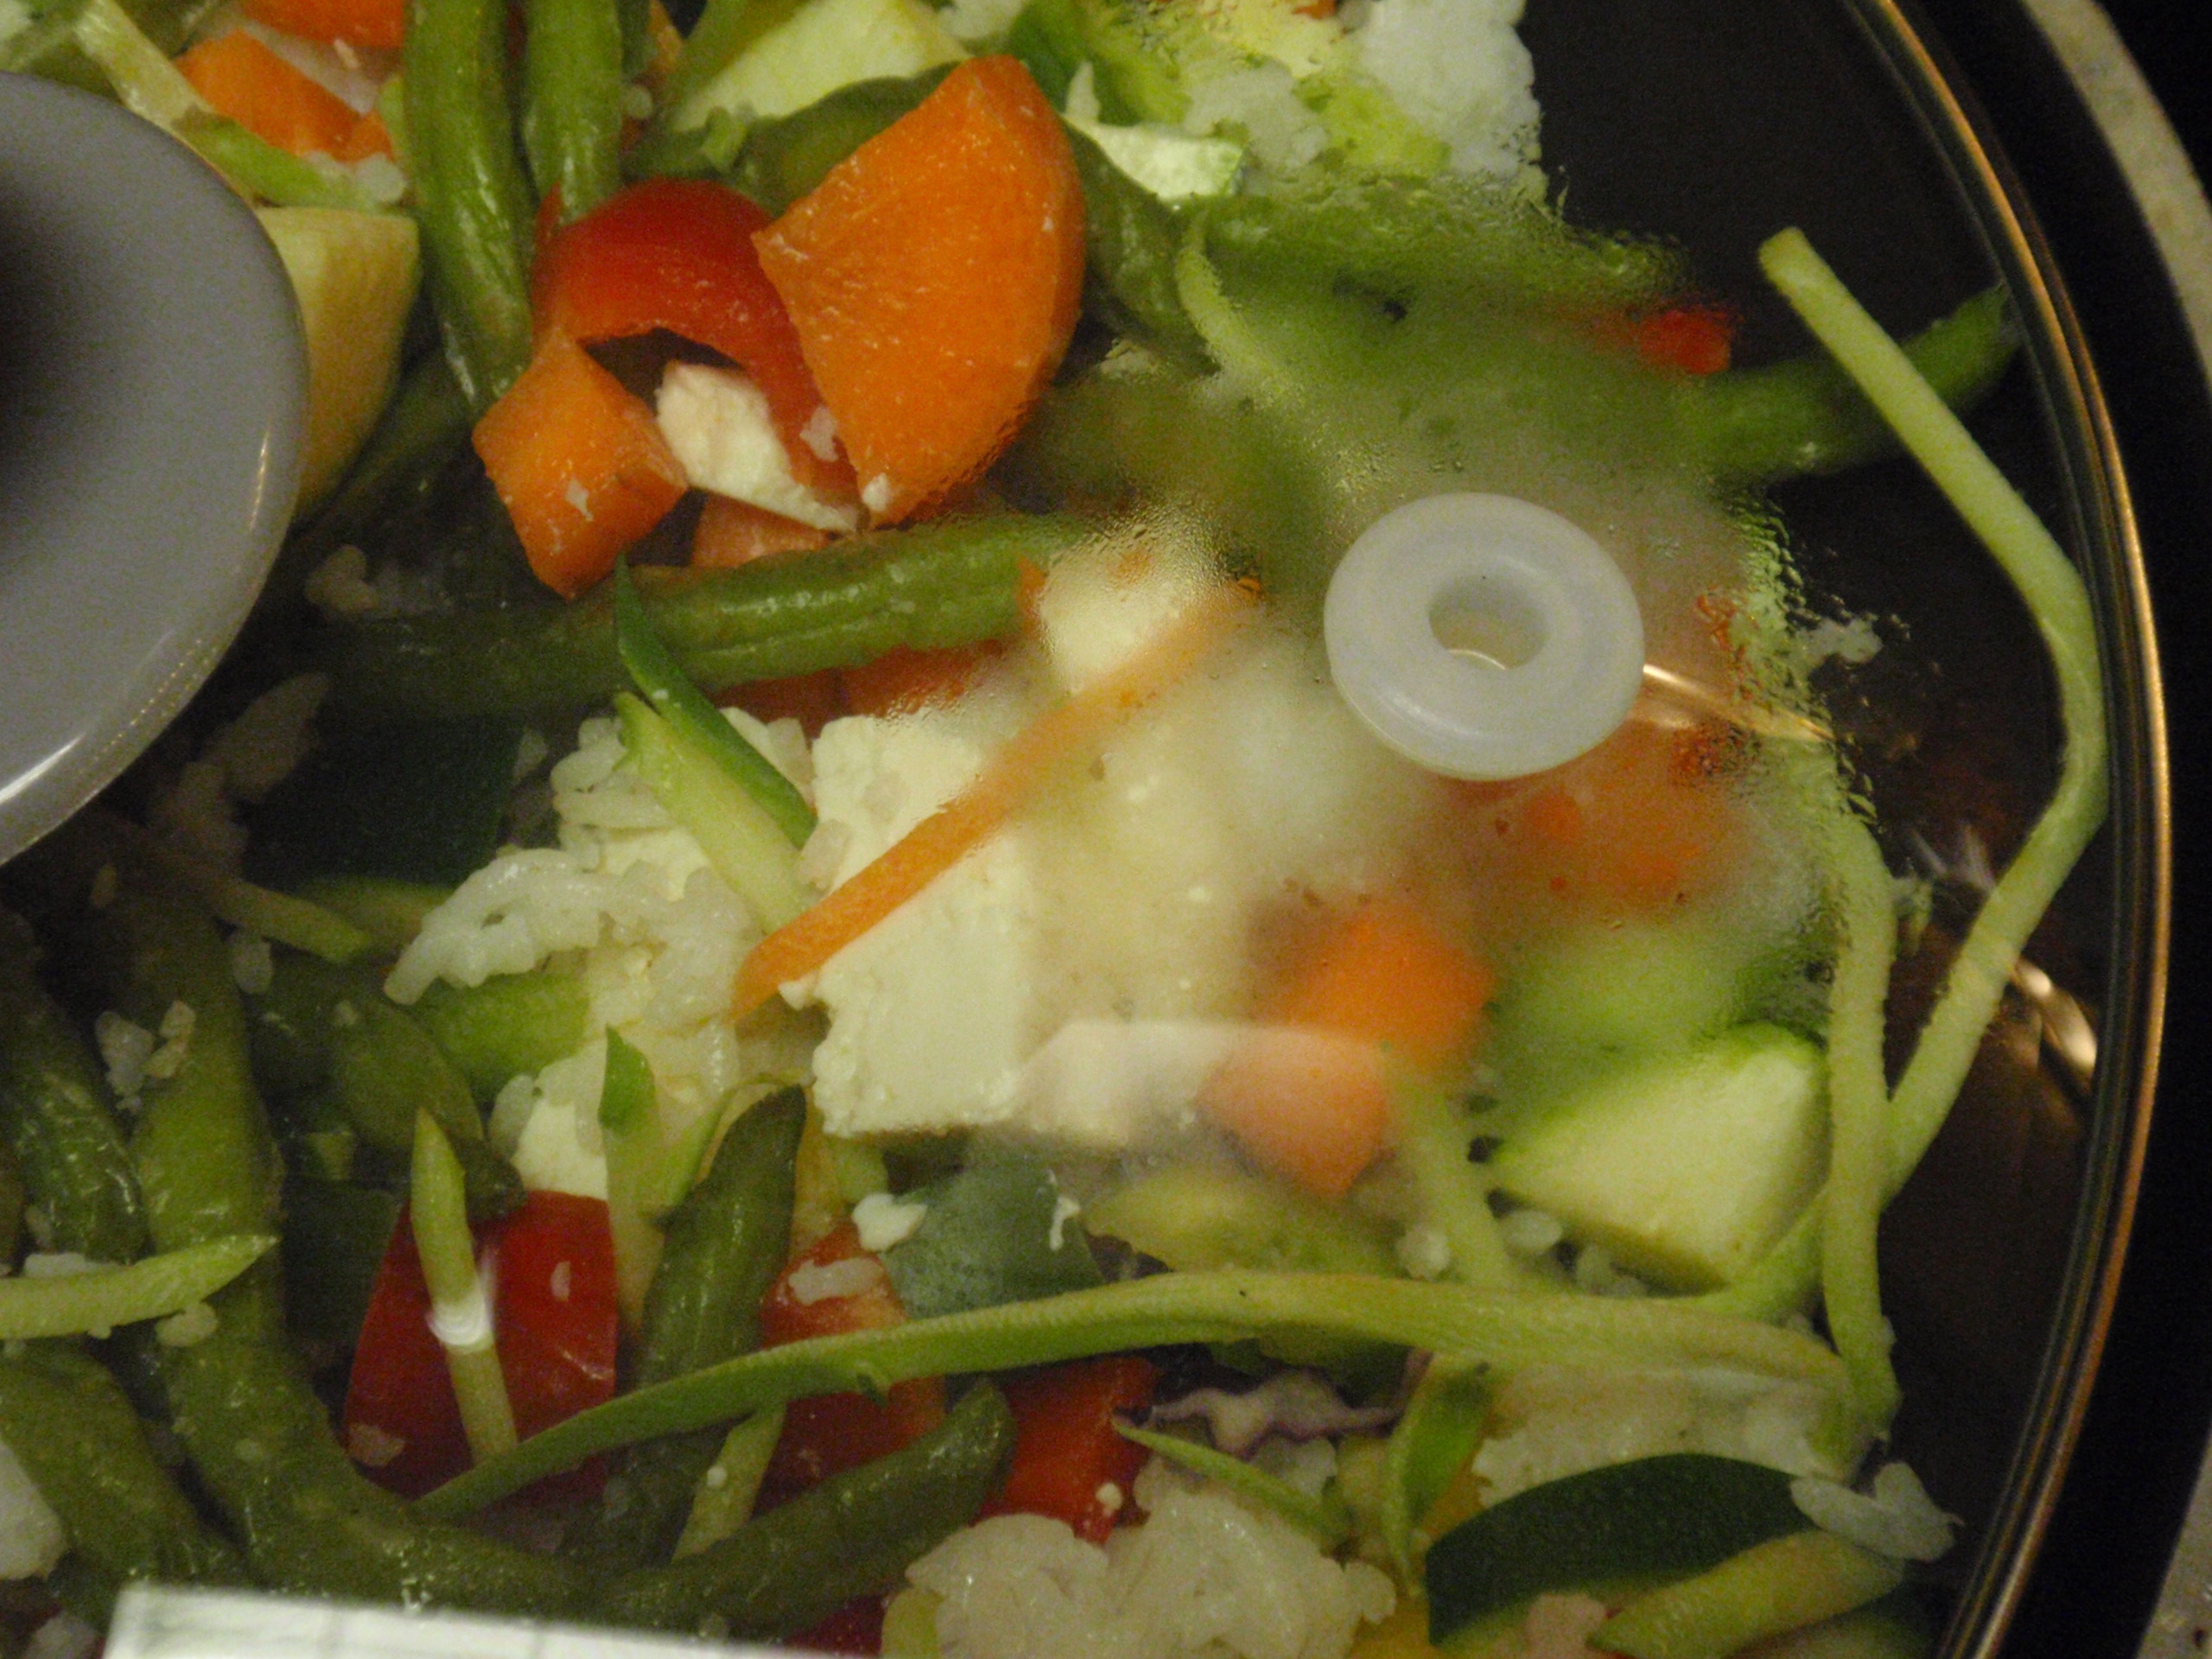 I steam the veggies on medium/high heat for 4 to 5 minutes before adding the stirfry sauce